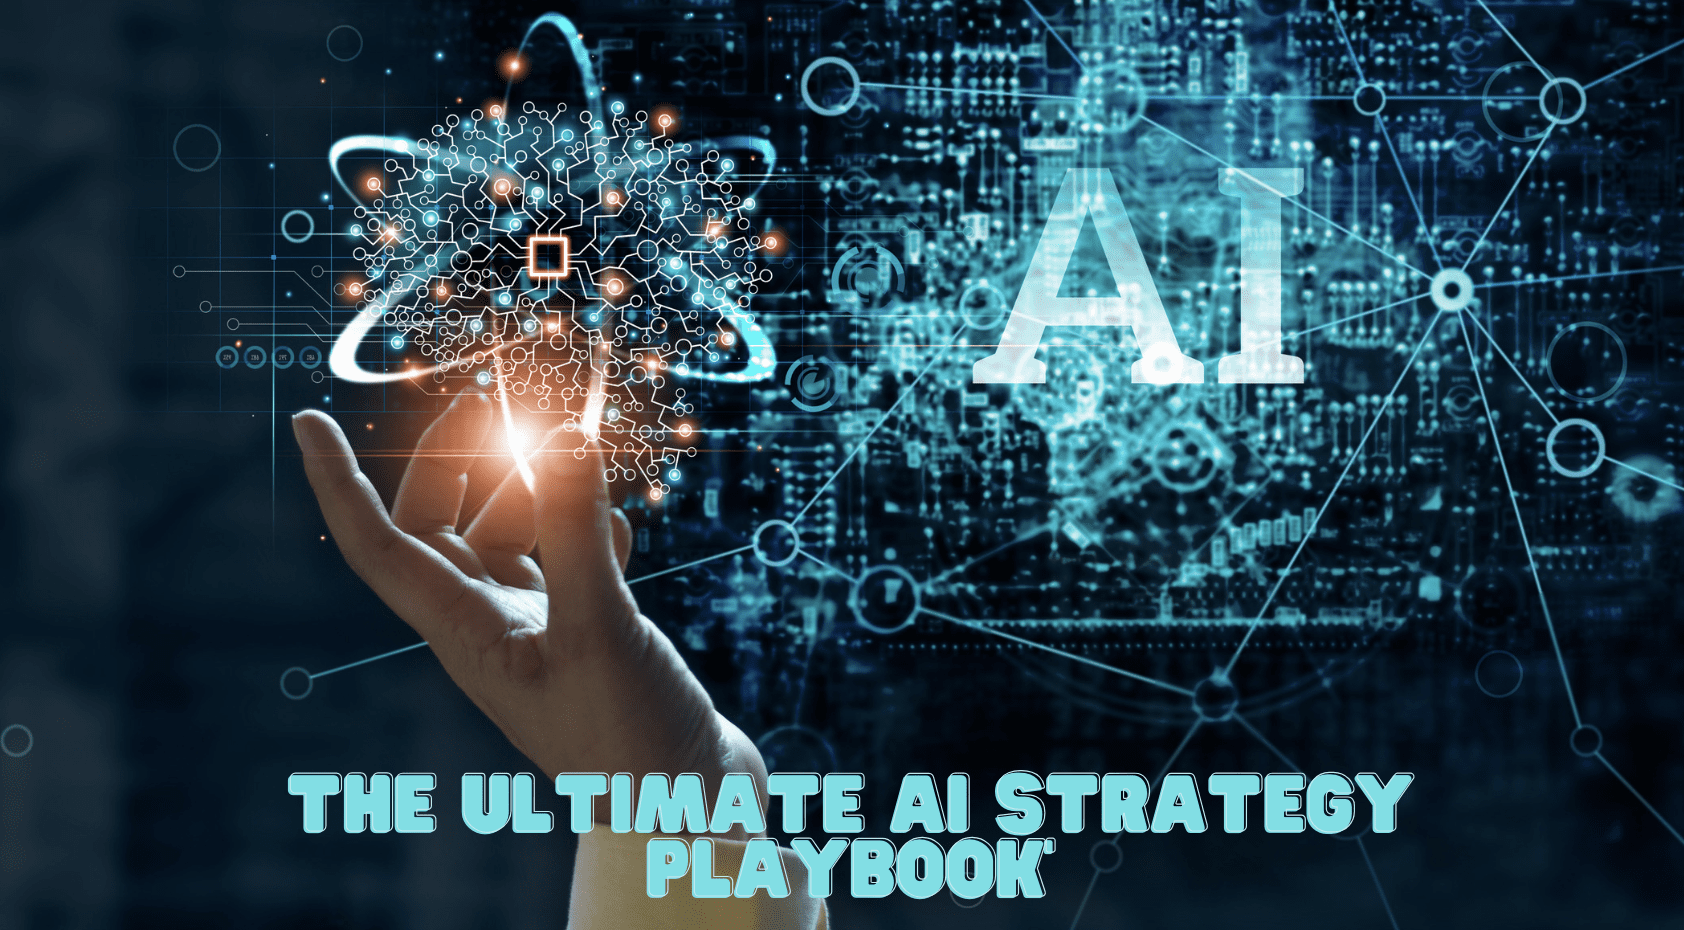 The Ultimate AI Strategy Playbook